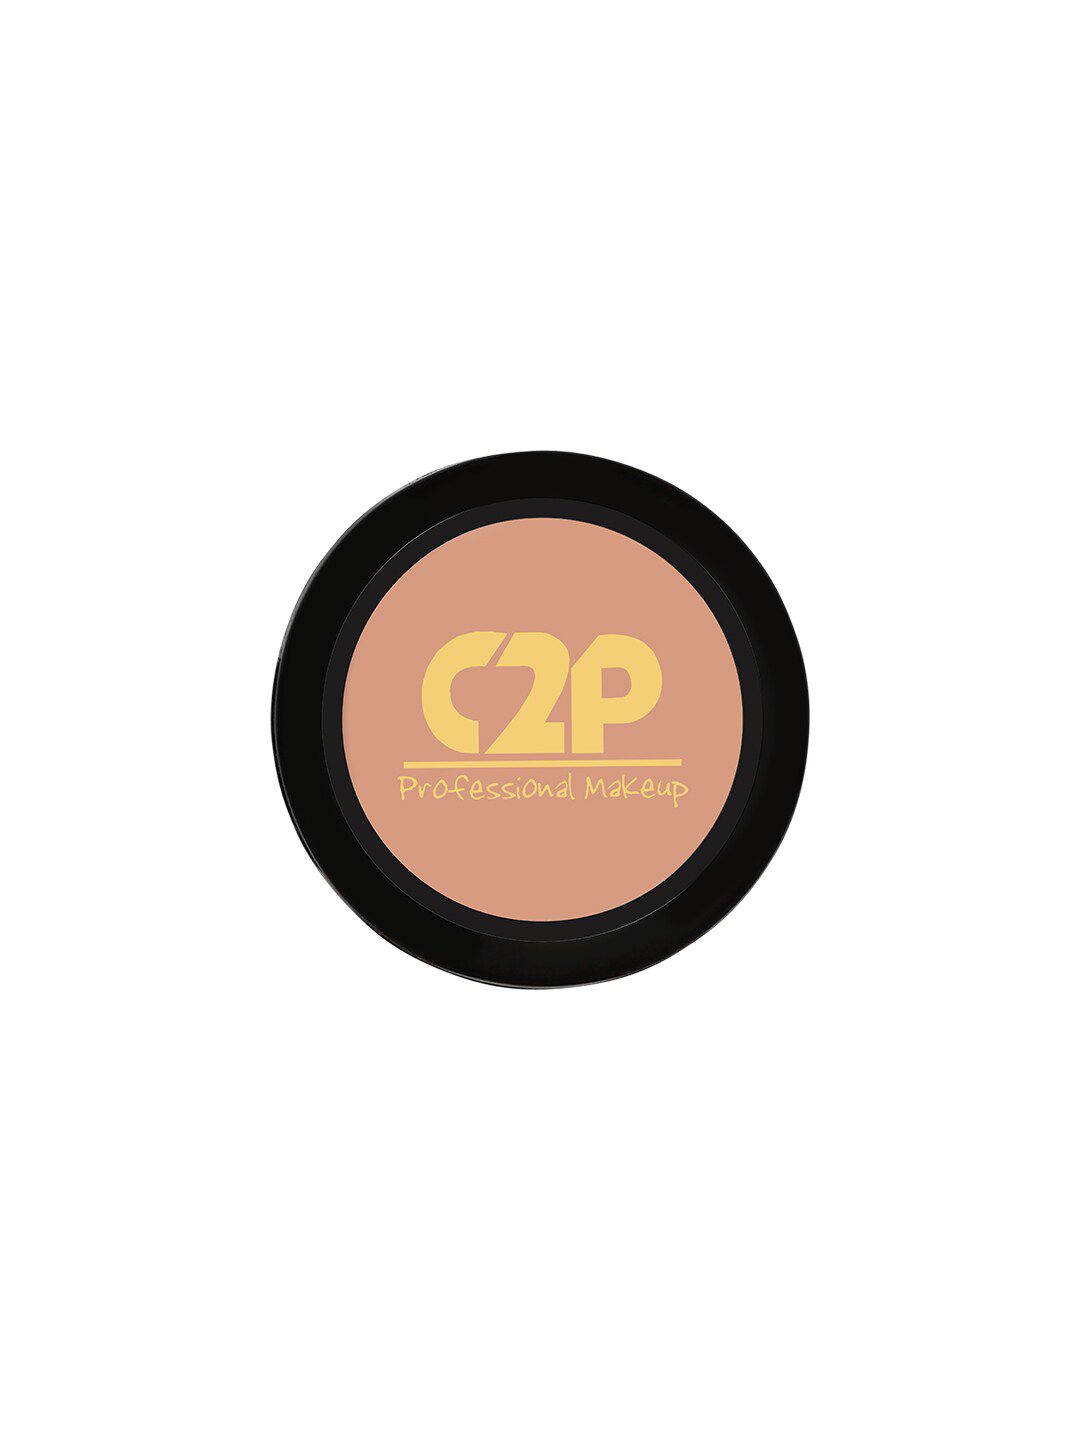 C2P PROFESSIONAL MAKEUP Nude Eyeshadow Base - Gloss Price in India